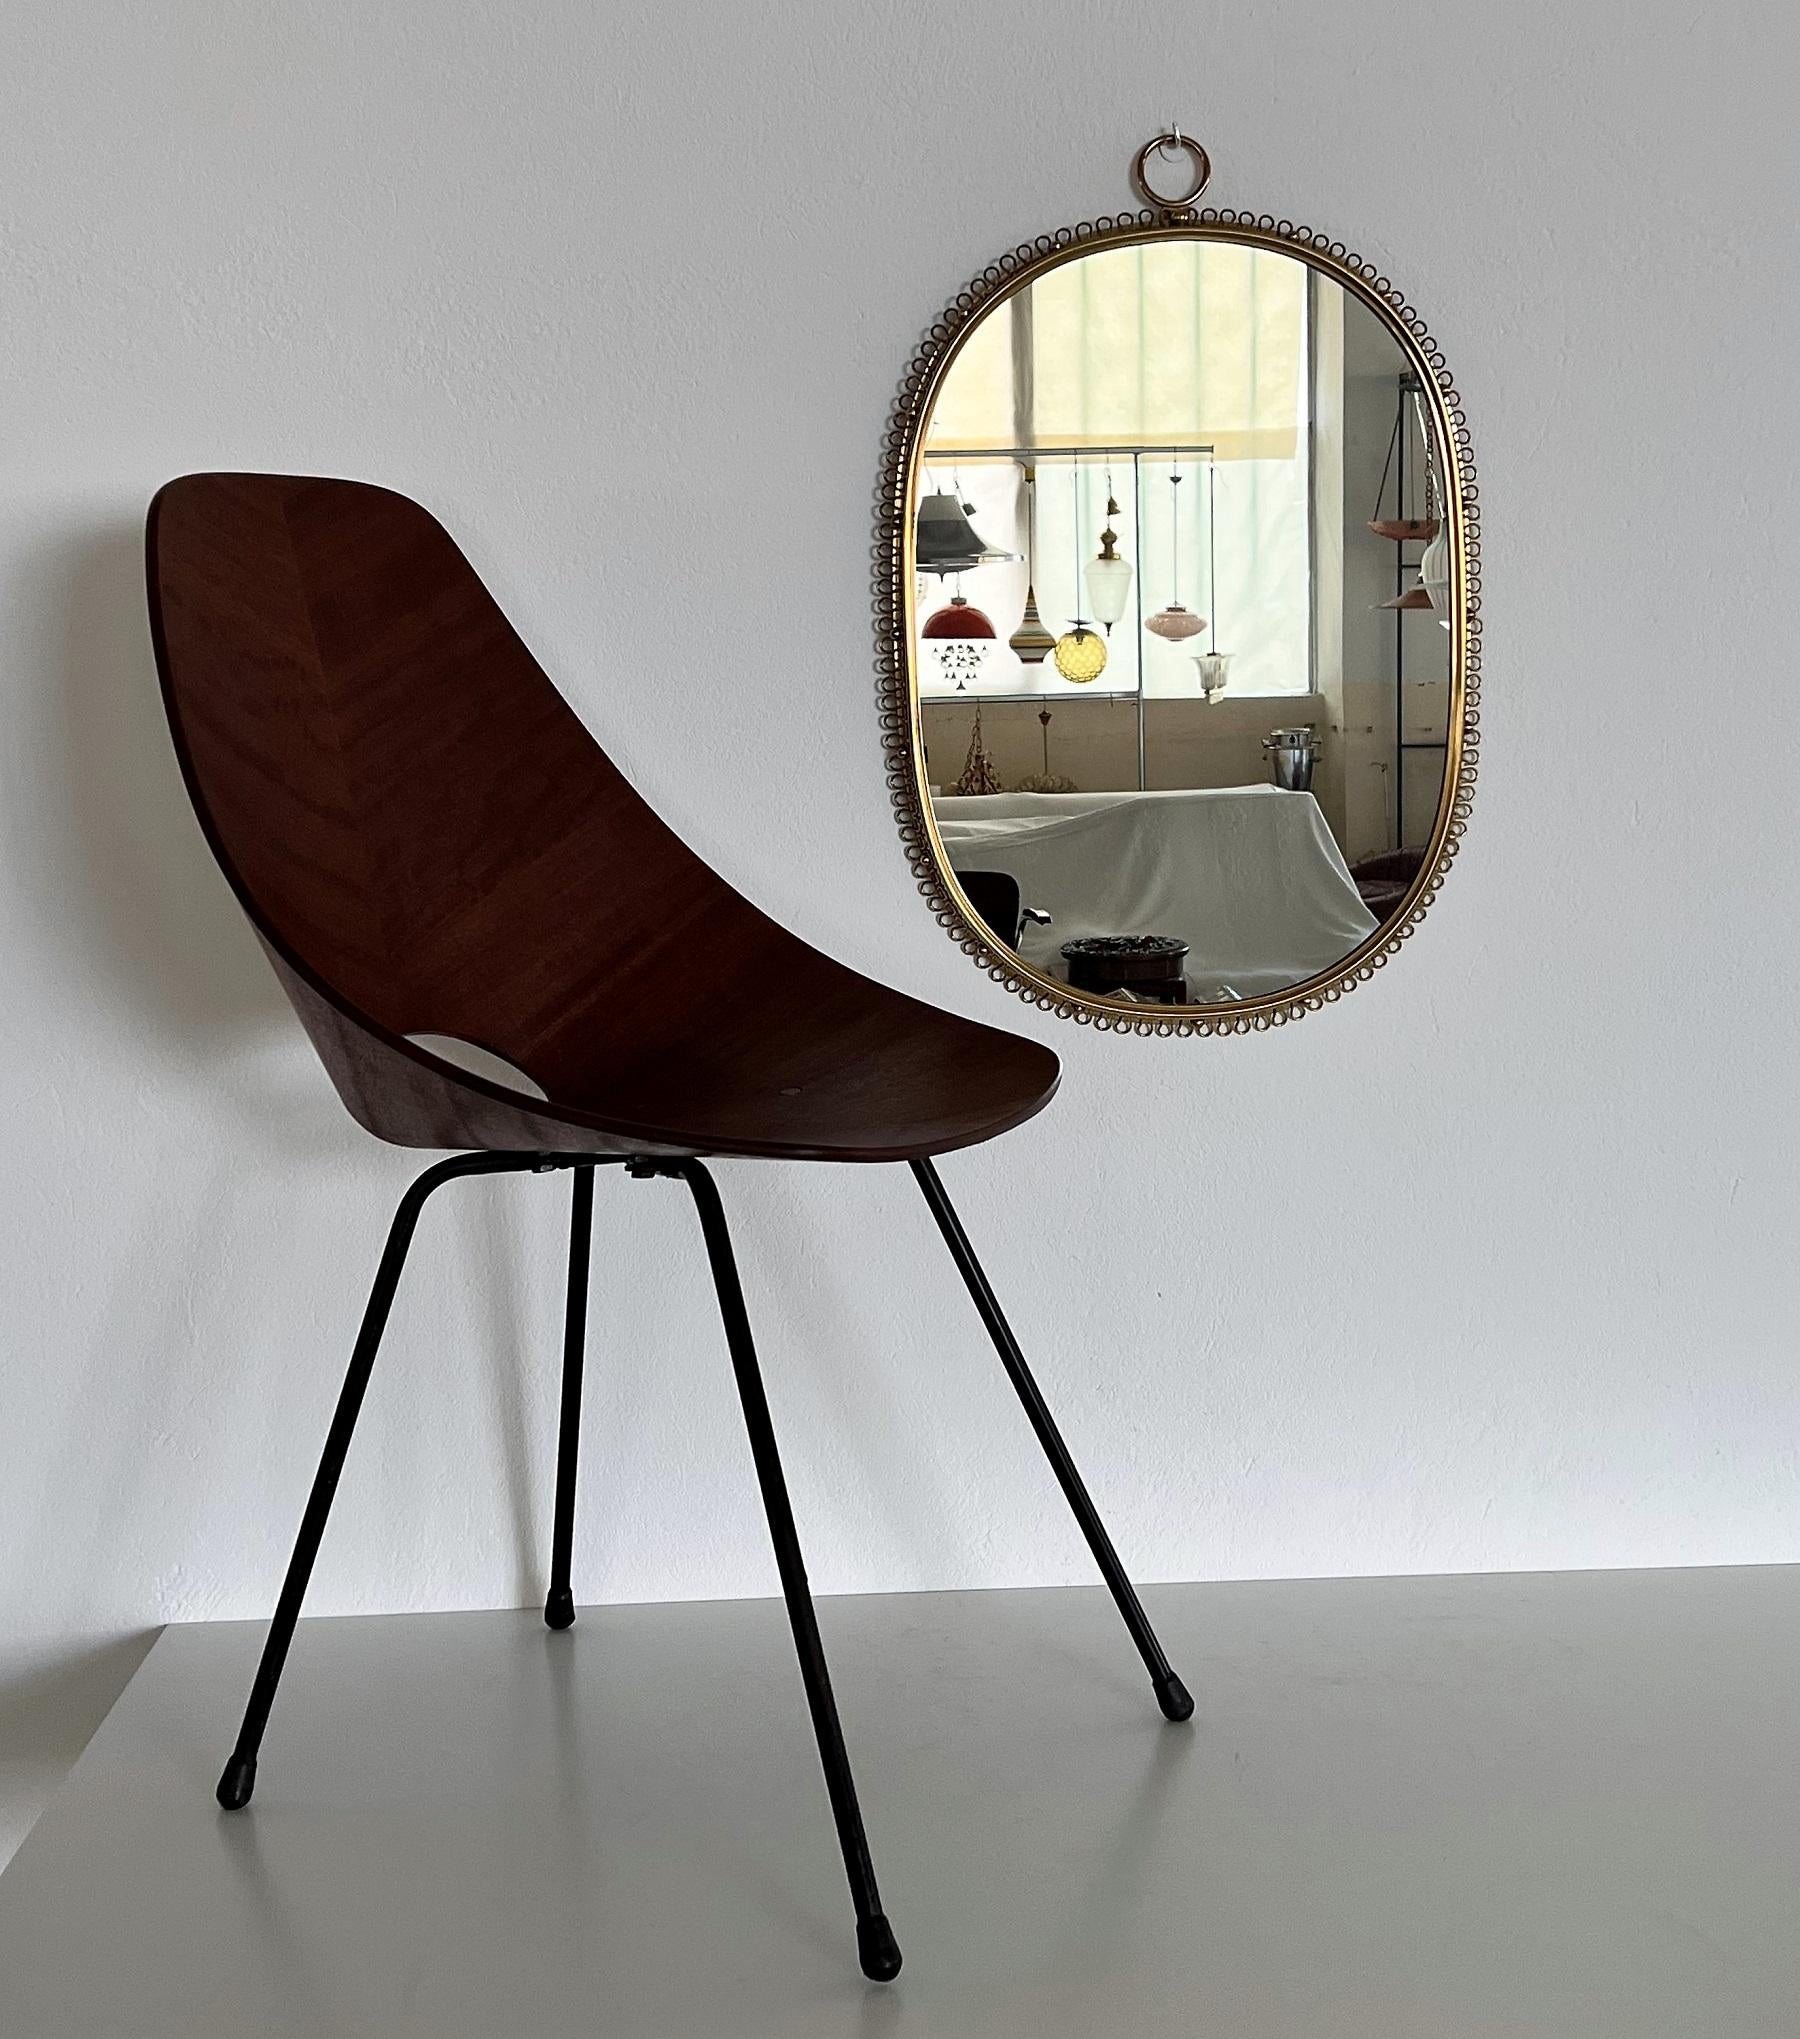 Gorgeous wall mirror designed by Austrian Josef Frank and manufactured in Sweden by Svenskt Tenn in the midcentury.
This mirror is made of full shiny brass frame with spiral loop frame around and big round hanging hook on top. 
You can easily